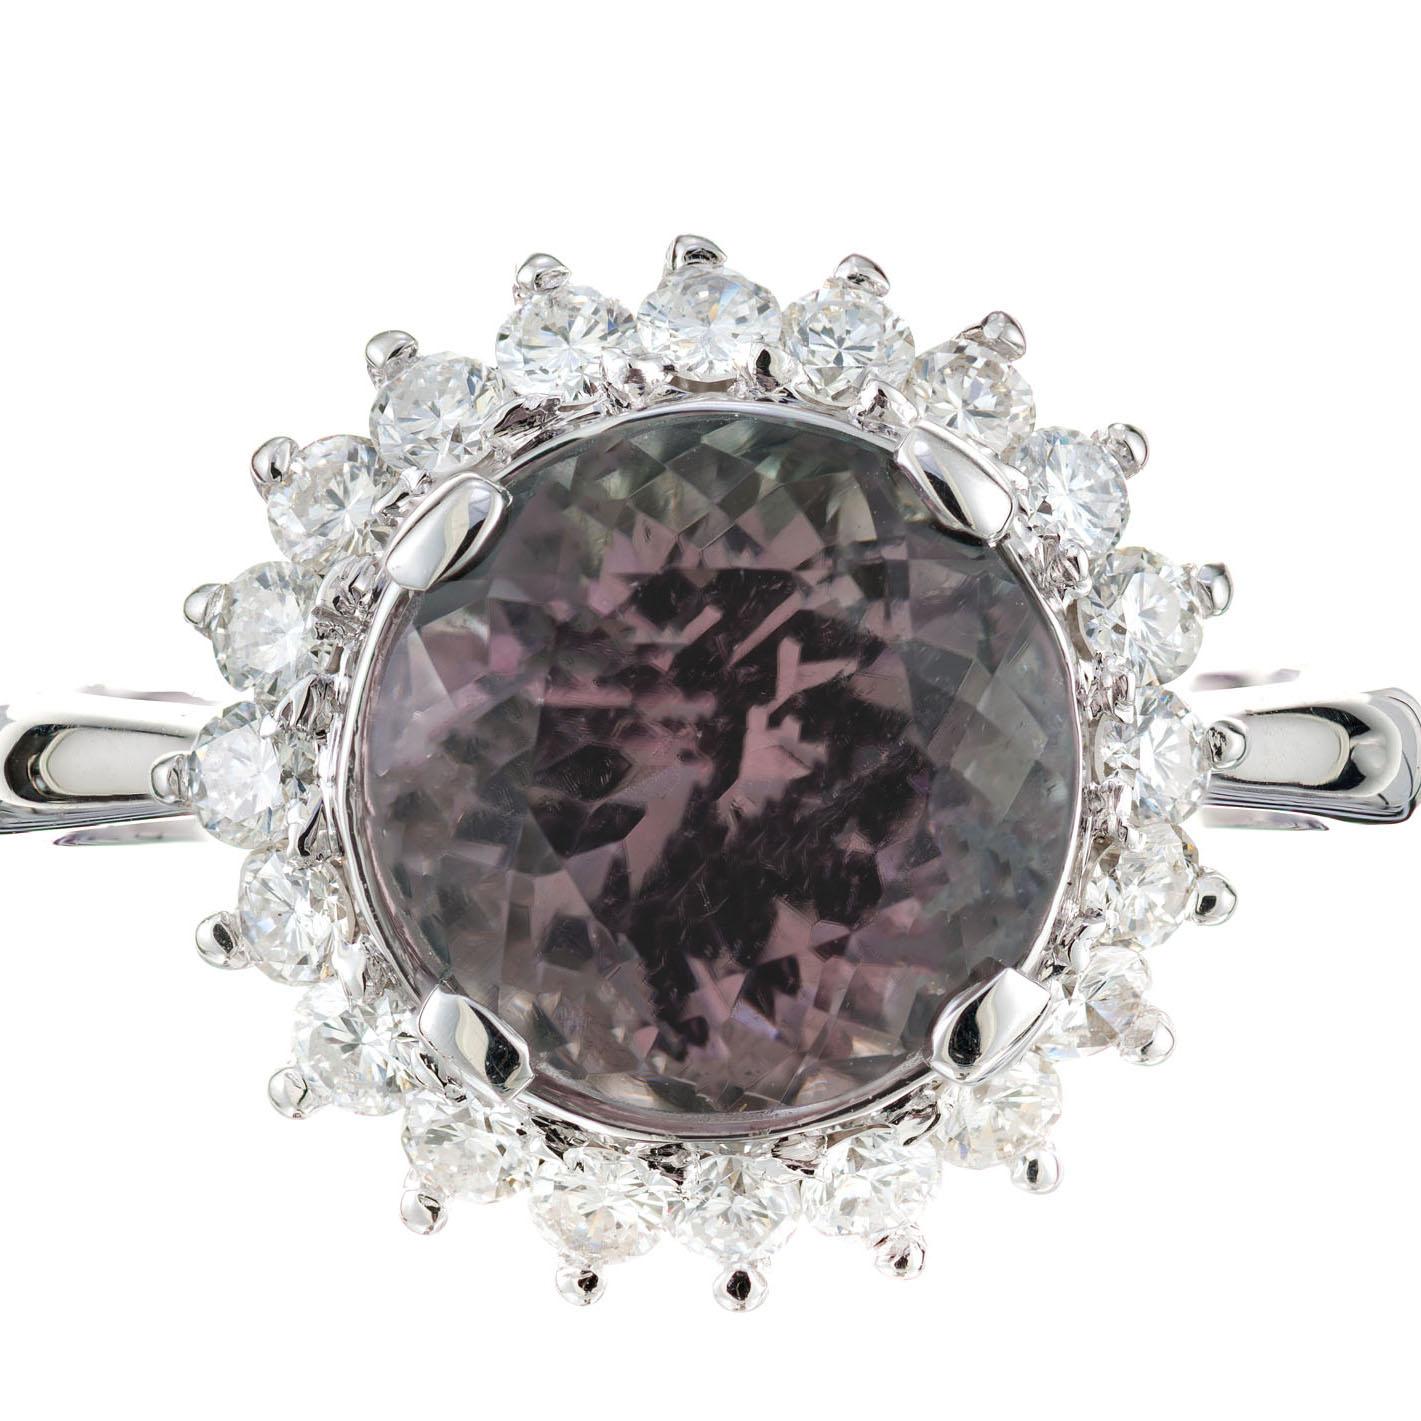 1960's Tourmaline and diamond engagement ring. 3.20ct tourmaline center stone with a halo of round diamonds in a platinum setting. The tourmaline is bi-color pink and purple, natural untreated.

1 round pink purple tourmaline, SI approx. 3.20cts
20